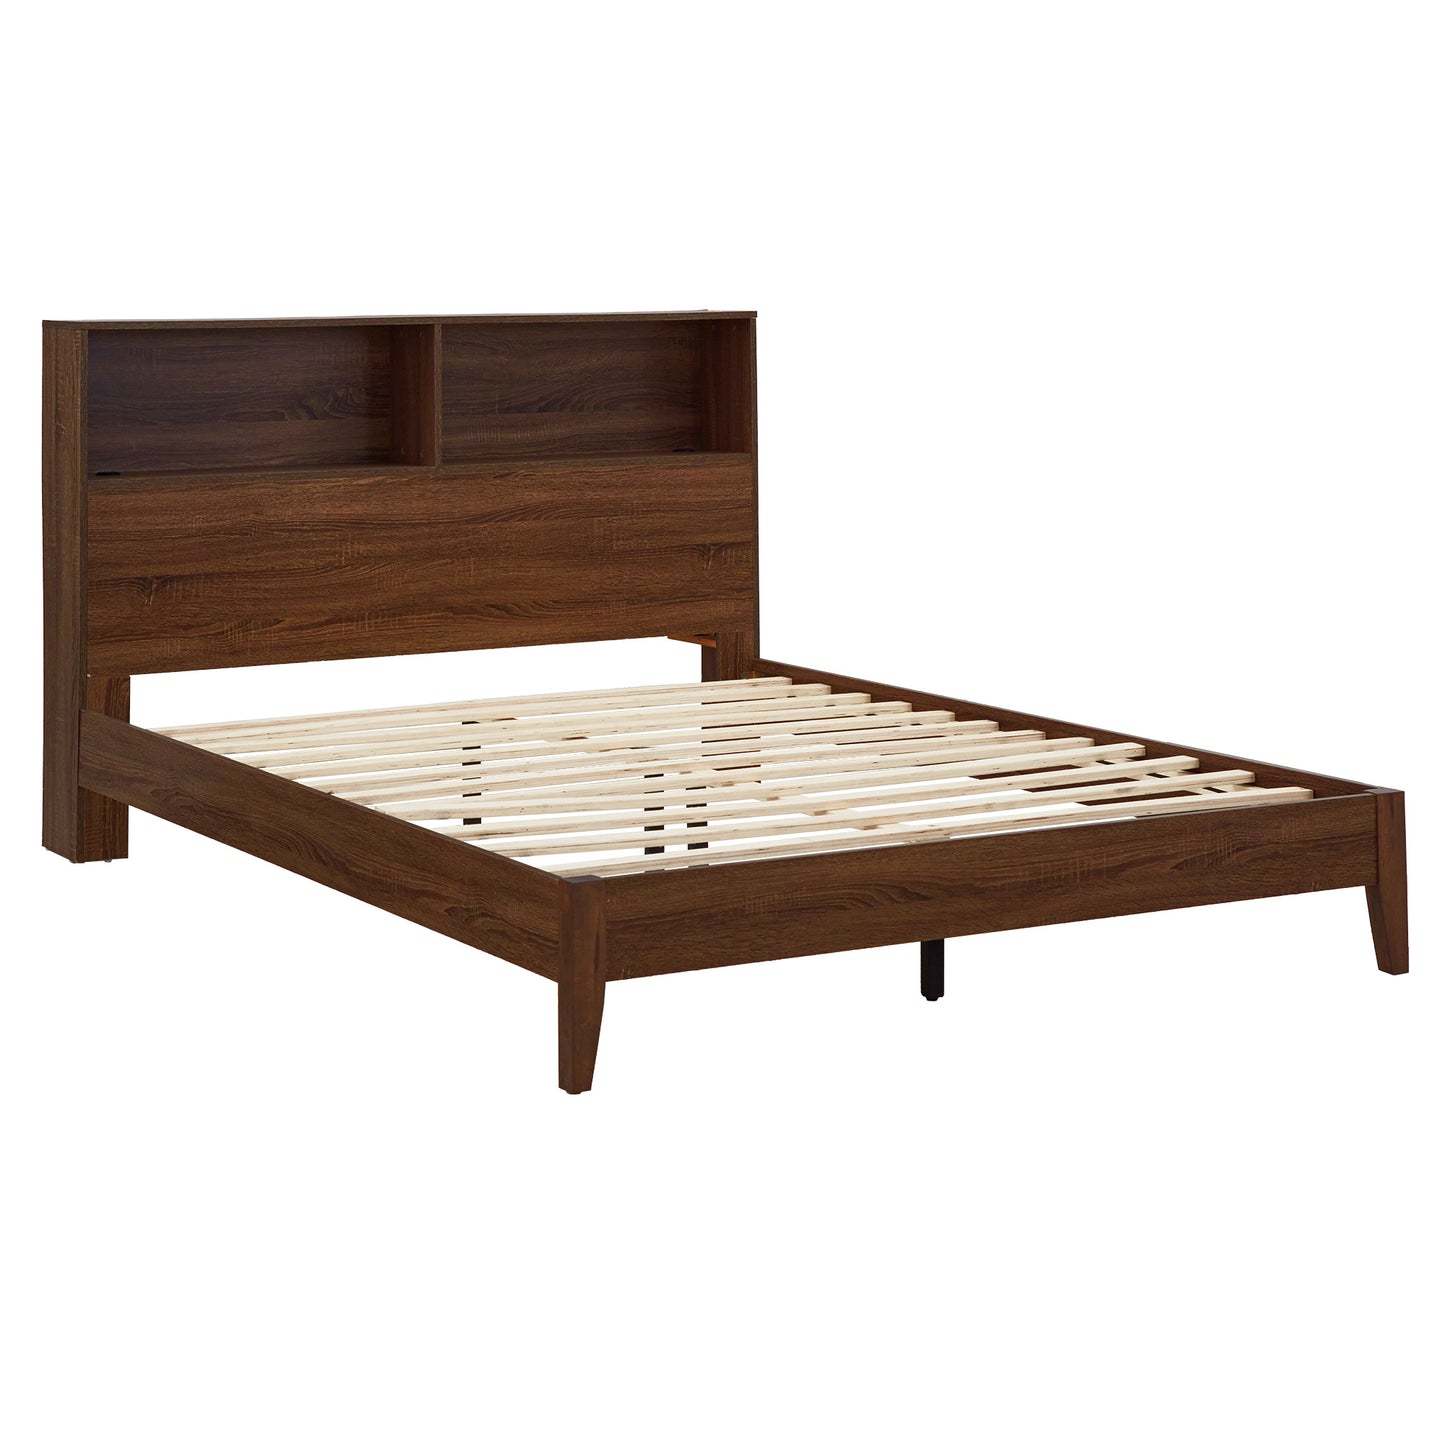 Bookcase Platform Bed with USBs - Cherry Finish, Queen Size